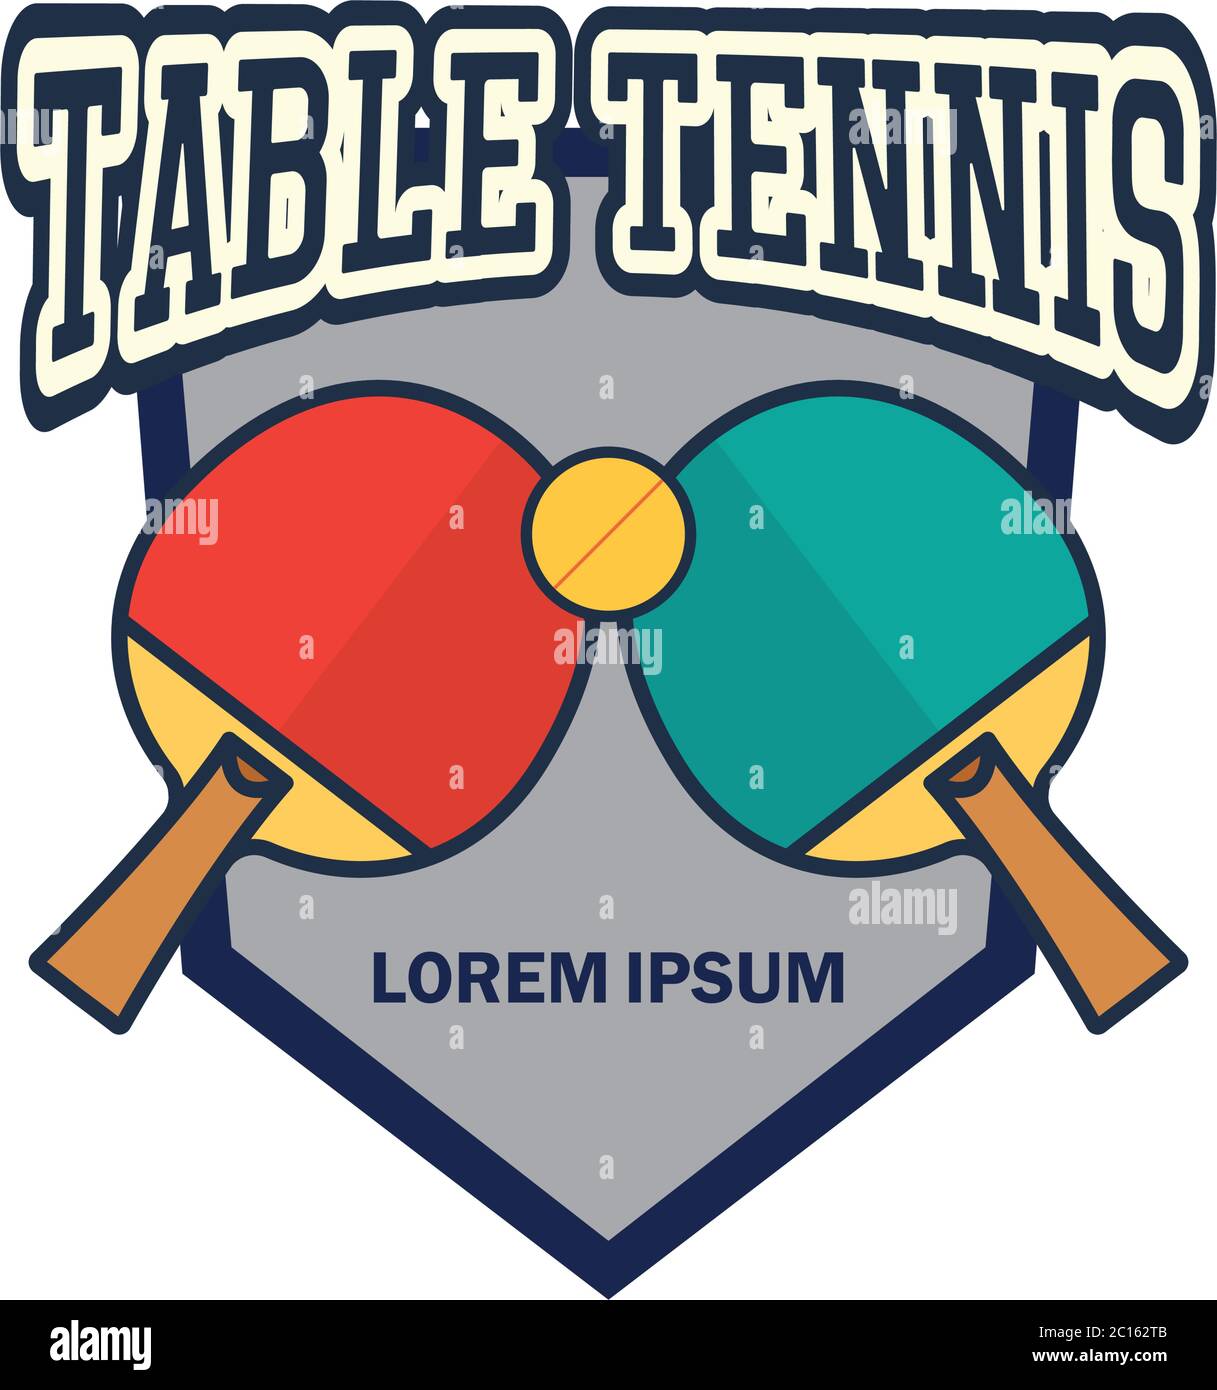 table tennis ping pong logo with text space for your slogan / tag line, vector illustration Stock Vector